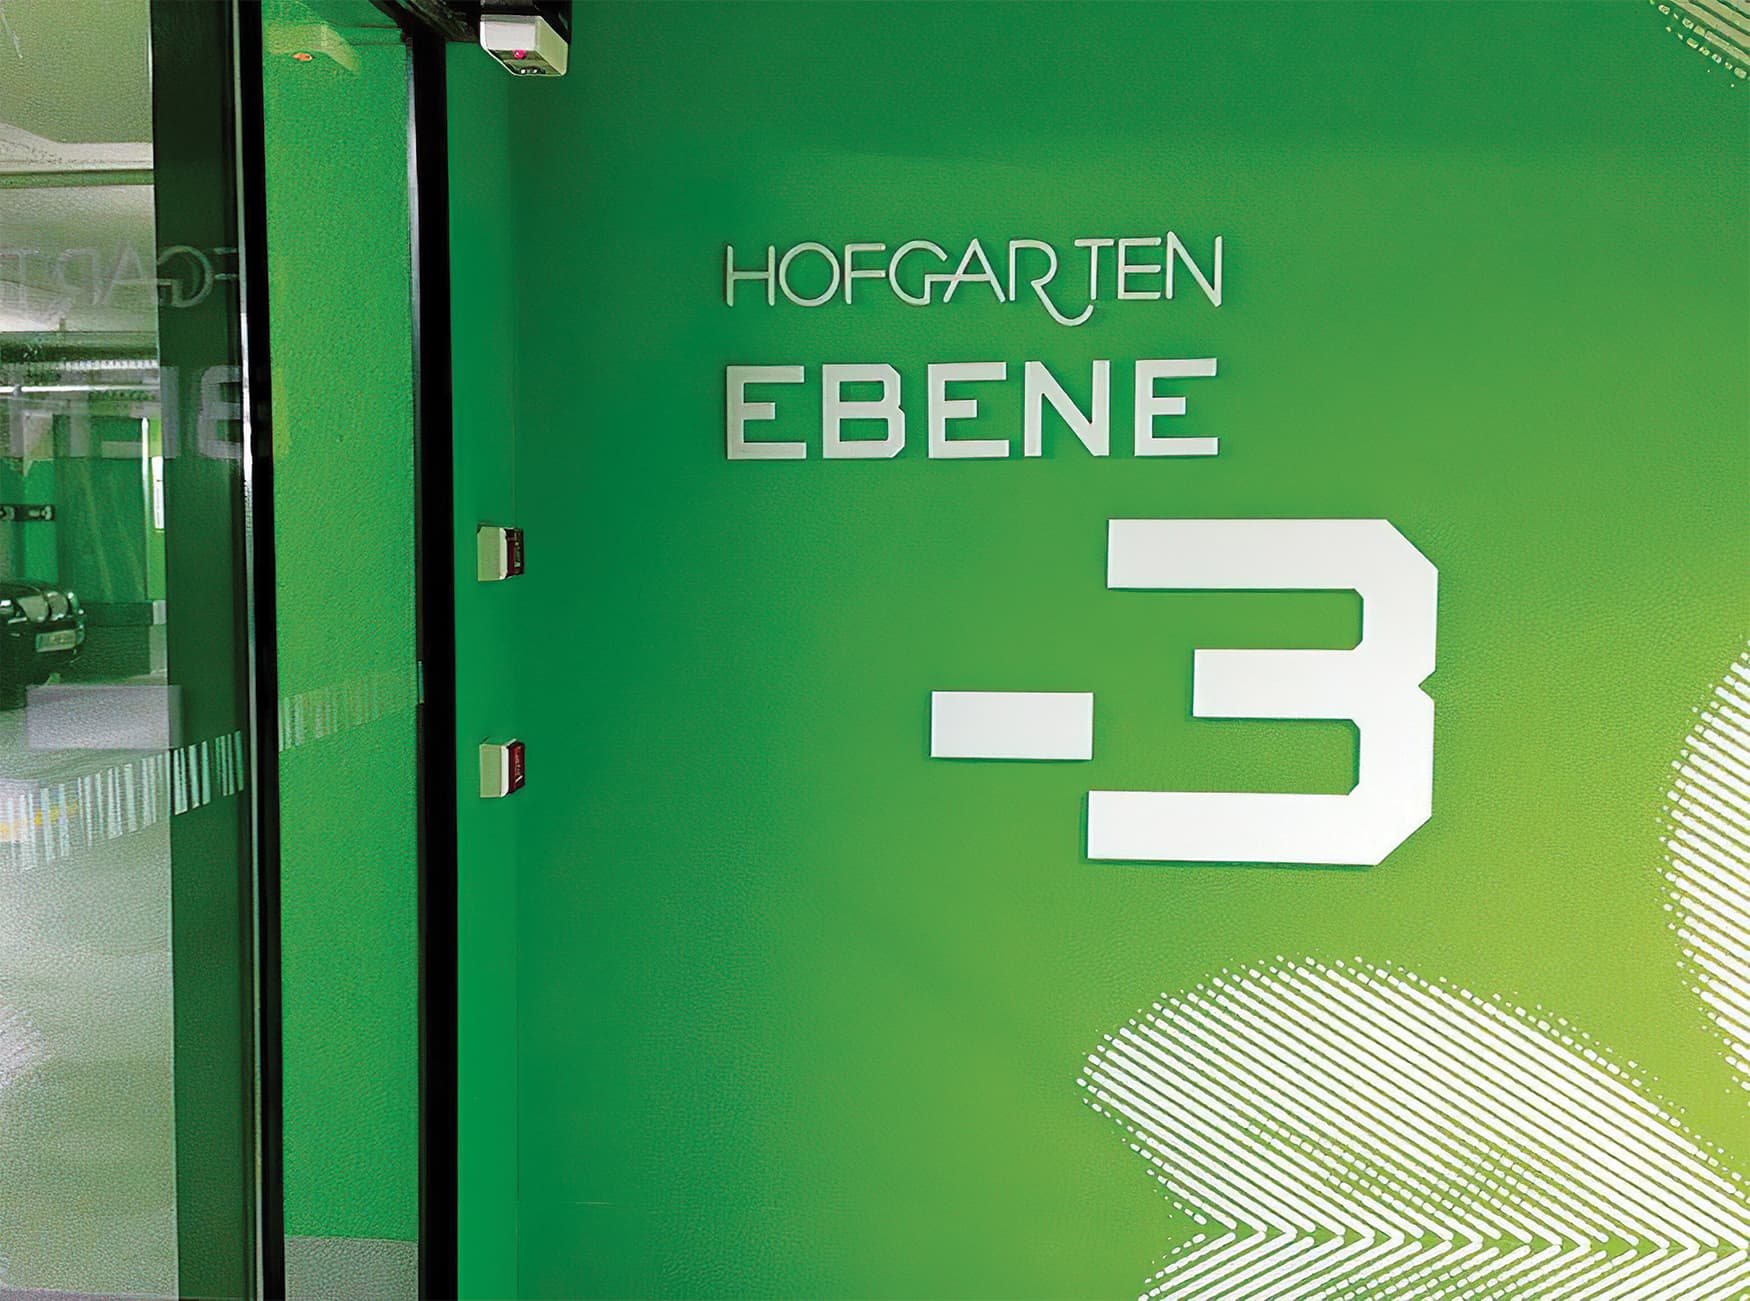 Hofgarten, a retail project in Solingen Germany, environmental graphics and graphic wayfinding design